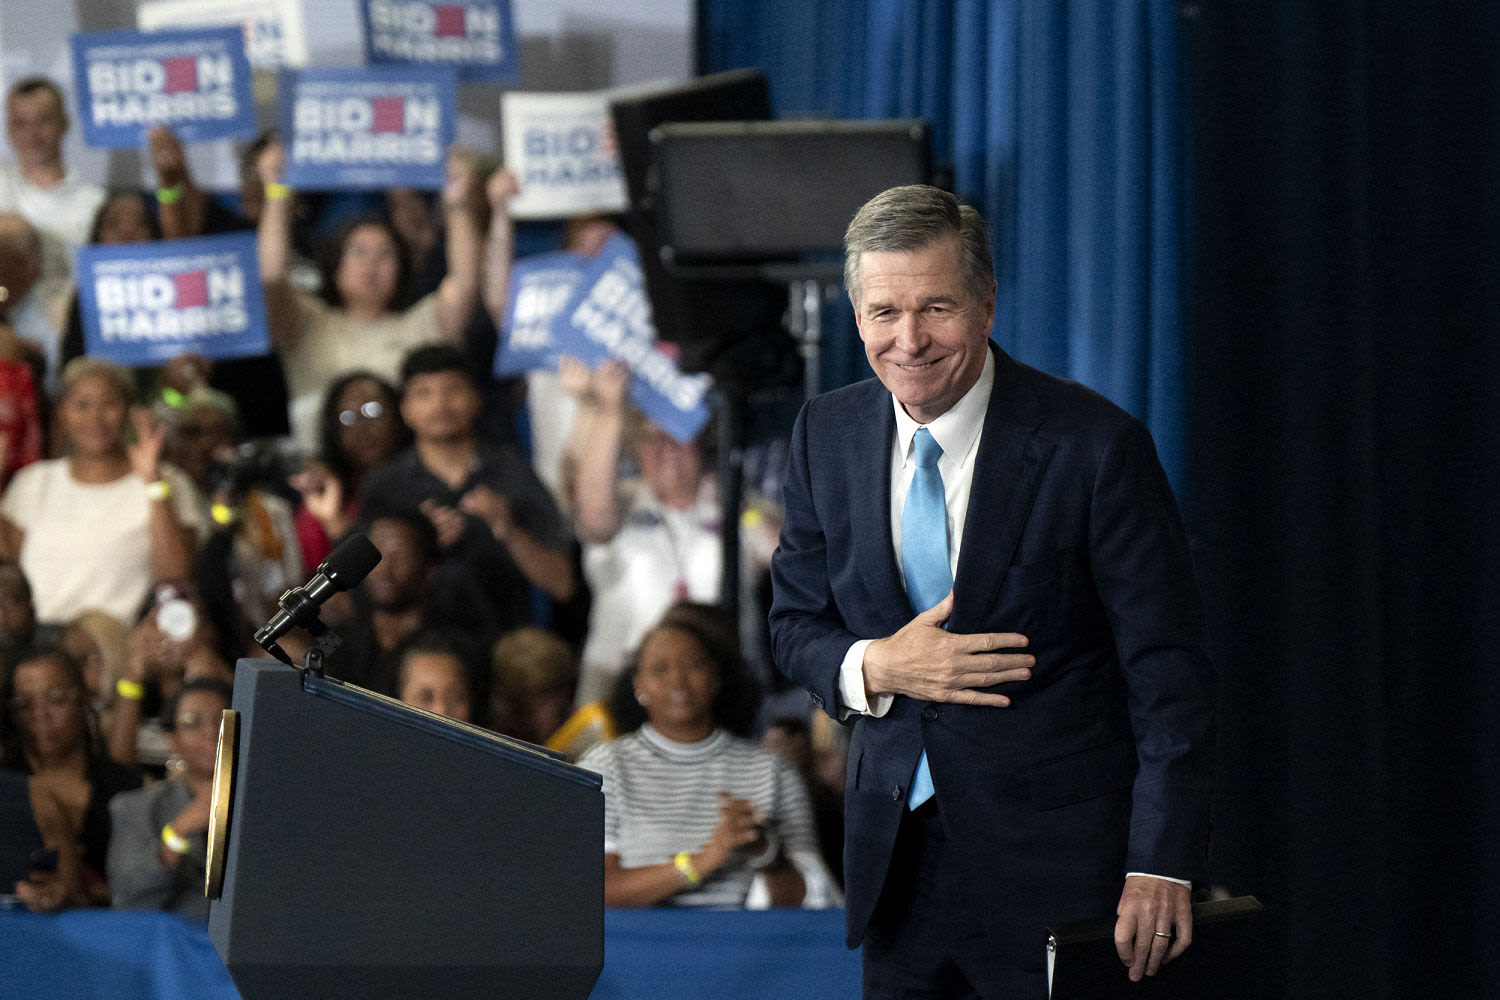 'Ultimate team player:' Why some Democrats think Roy Cooper is Harris' top VP pick